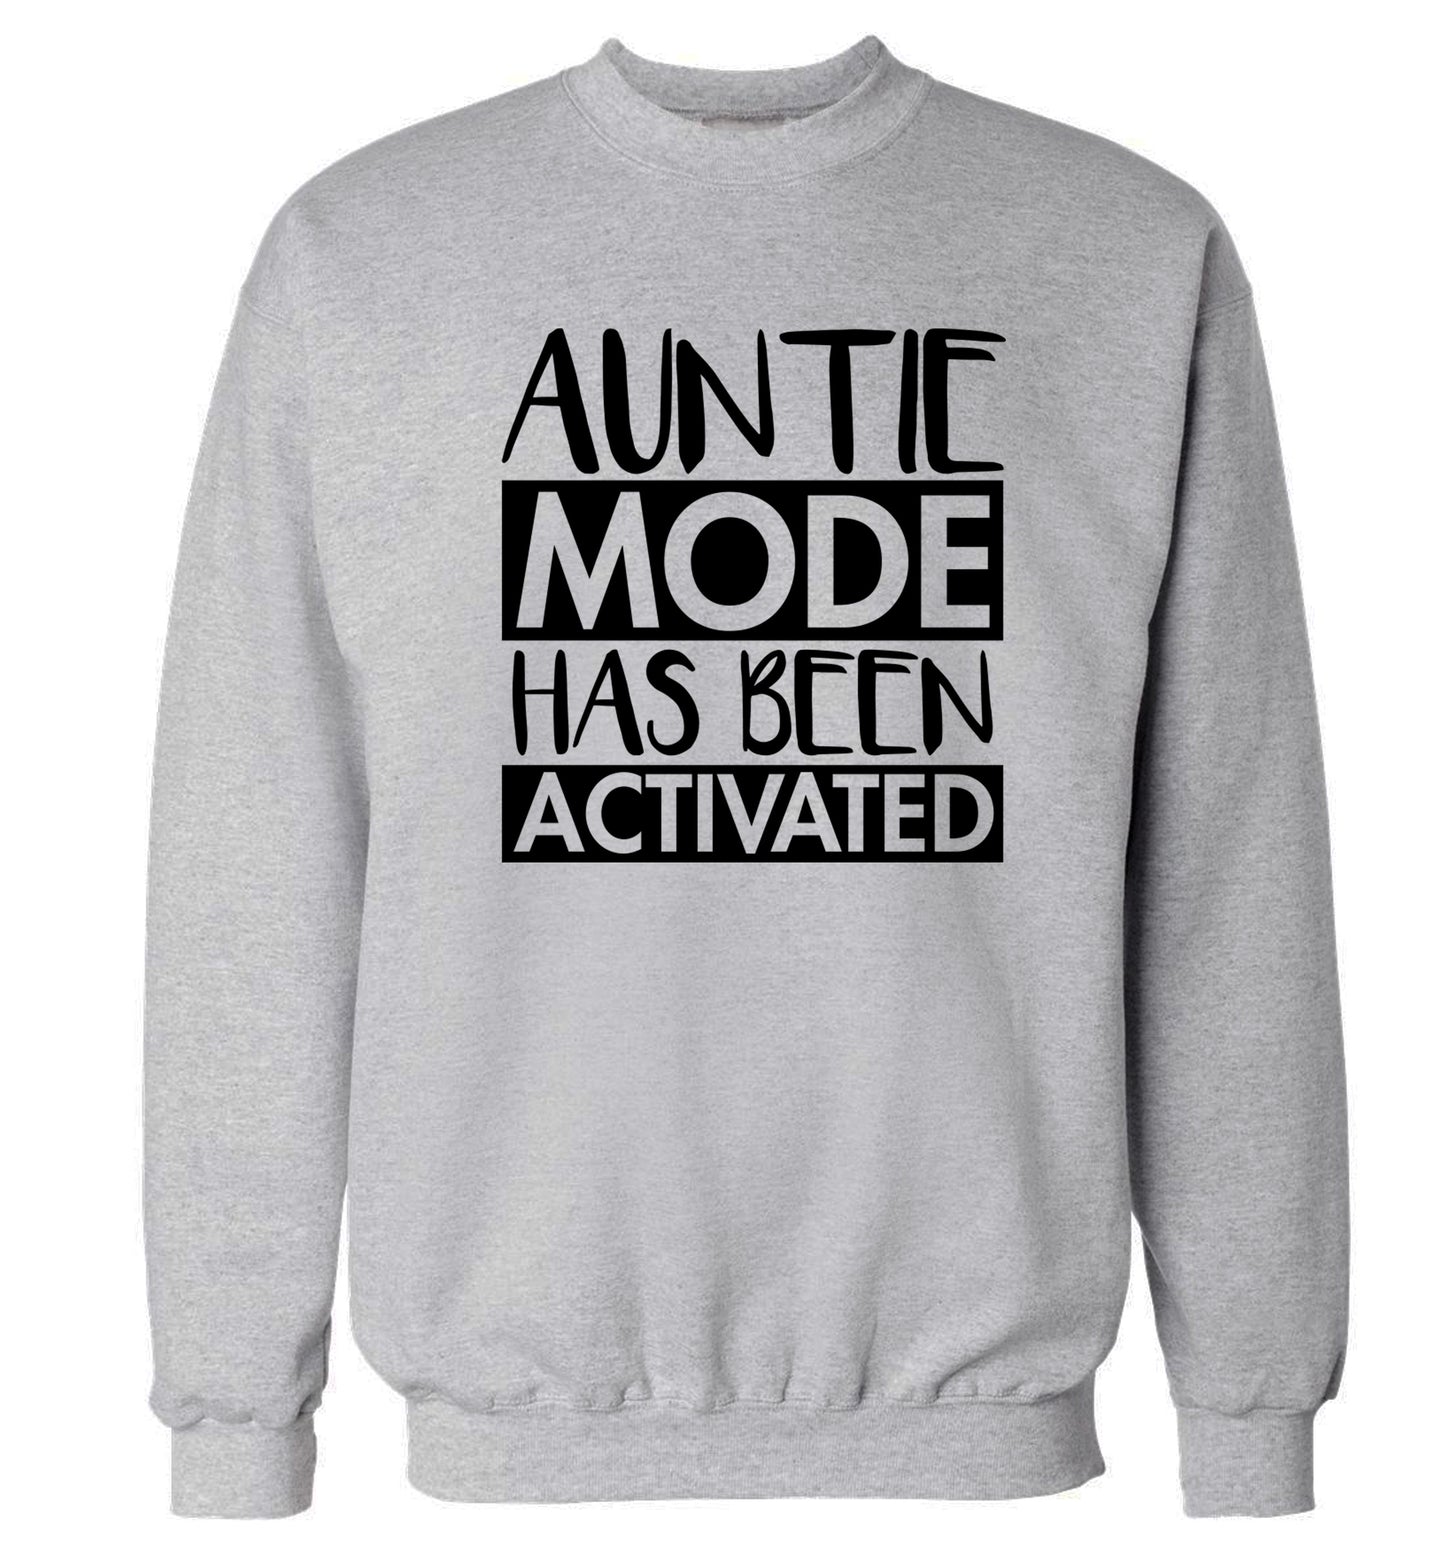 Auntie mode activated Adult's unisex grey Sweater 2XL